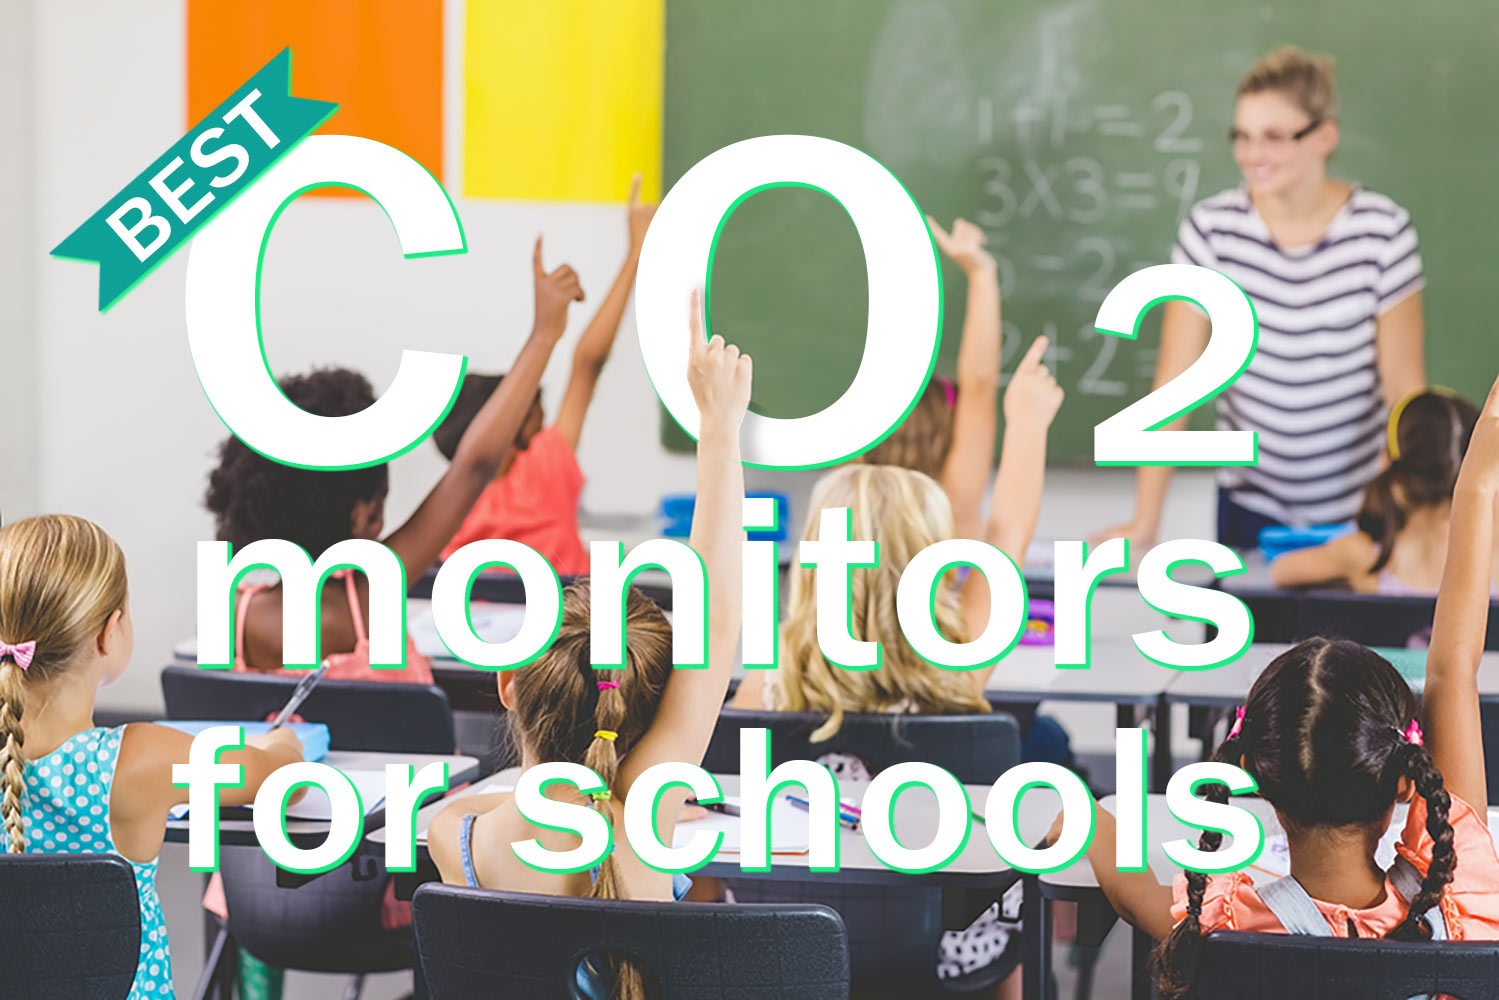 Best CO2 for schools